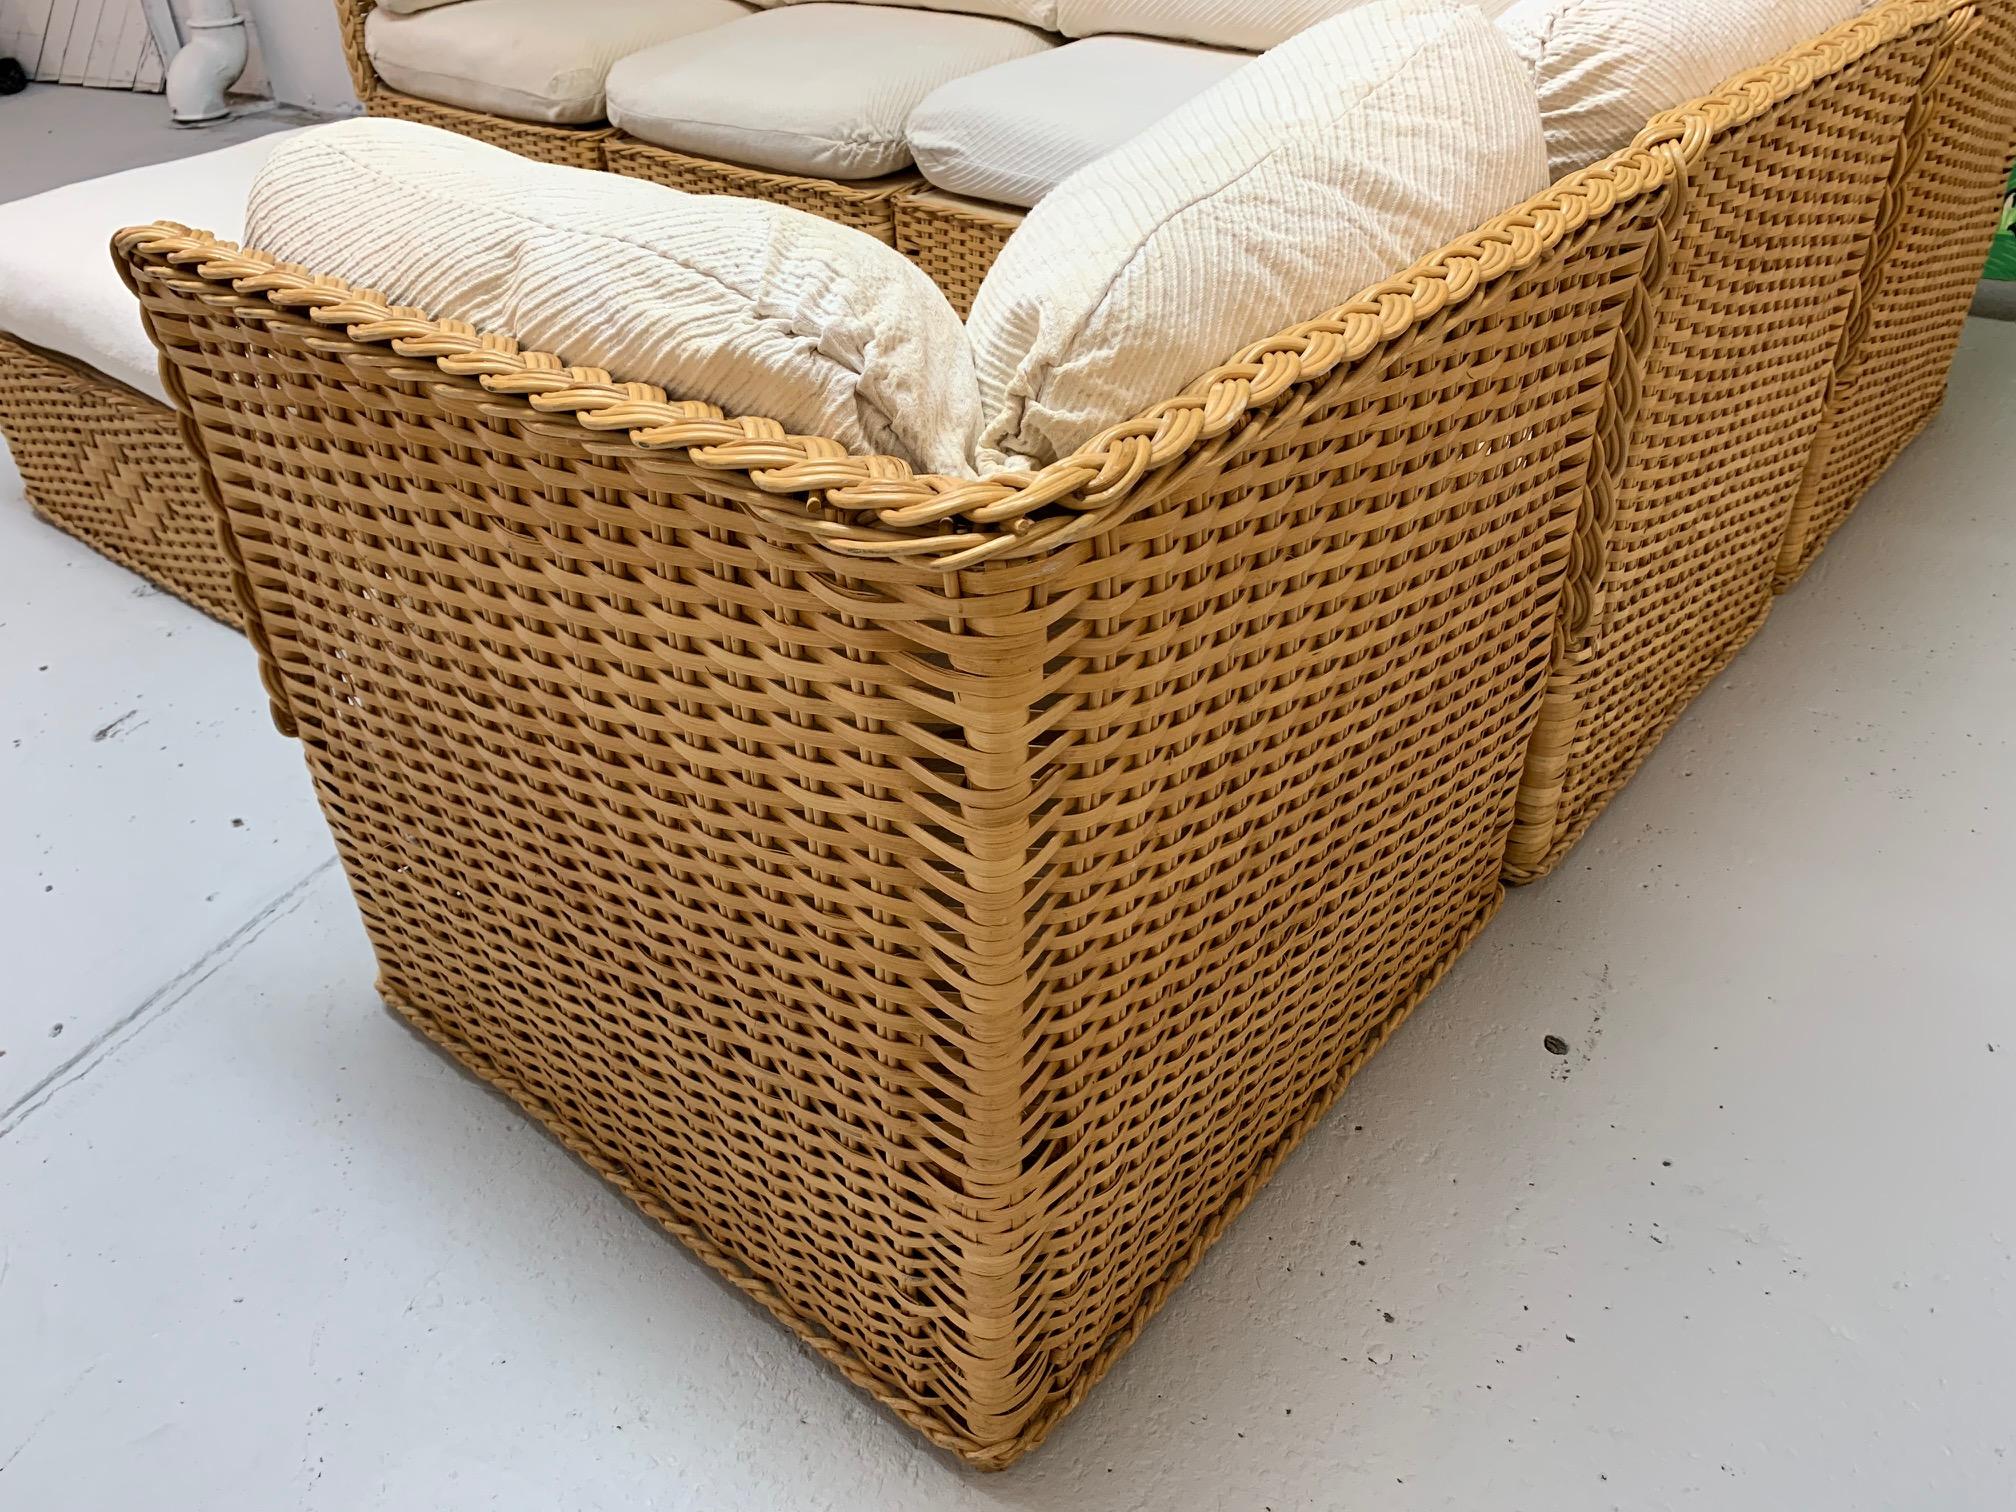 Large 7-piece wicker sectional sofa in the style of Michael Taylor features modular design and matching ottoman. Cushions in excellent condition with cream upholstered removable covers. Slight staining on some covers. Frames in very good condition